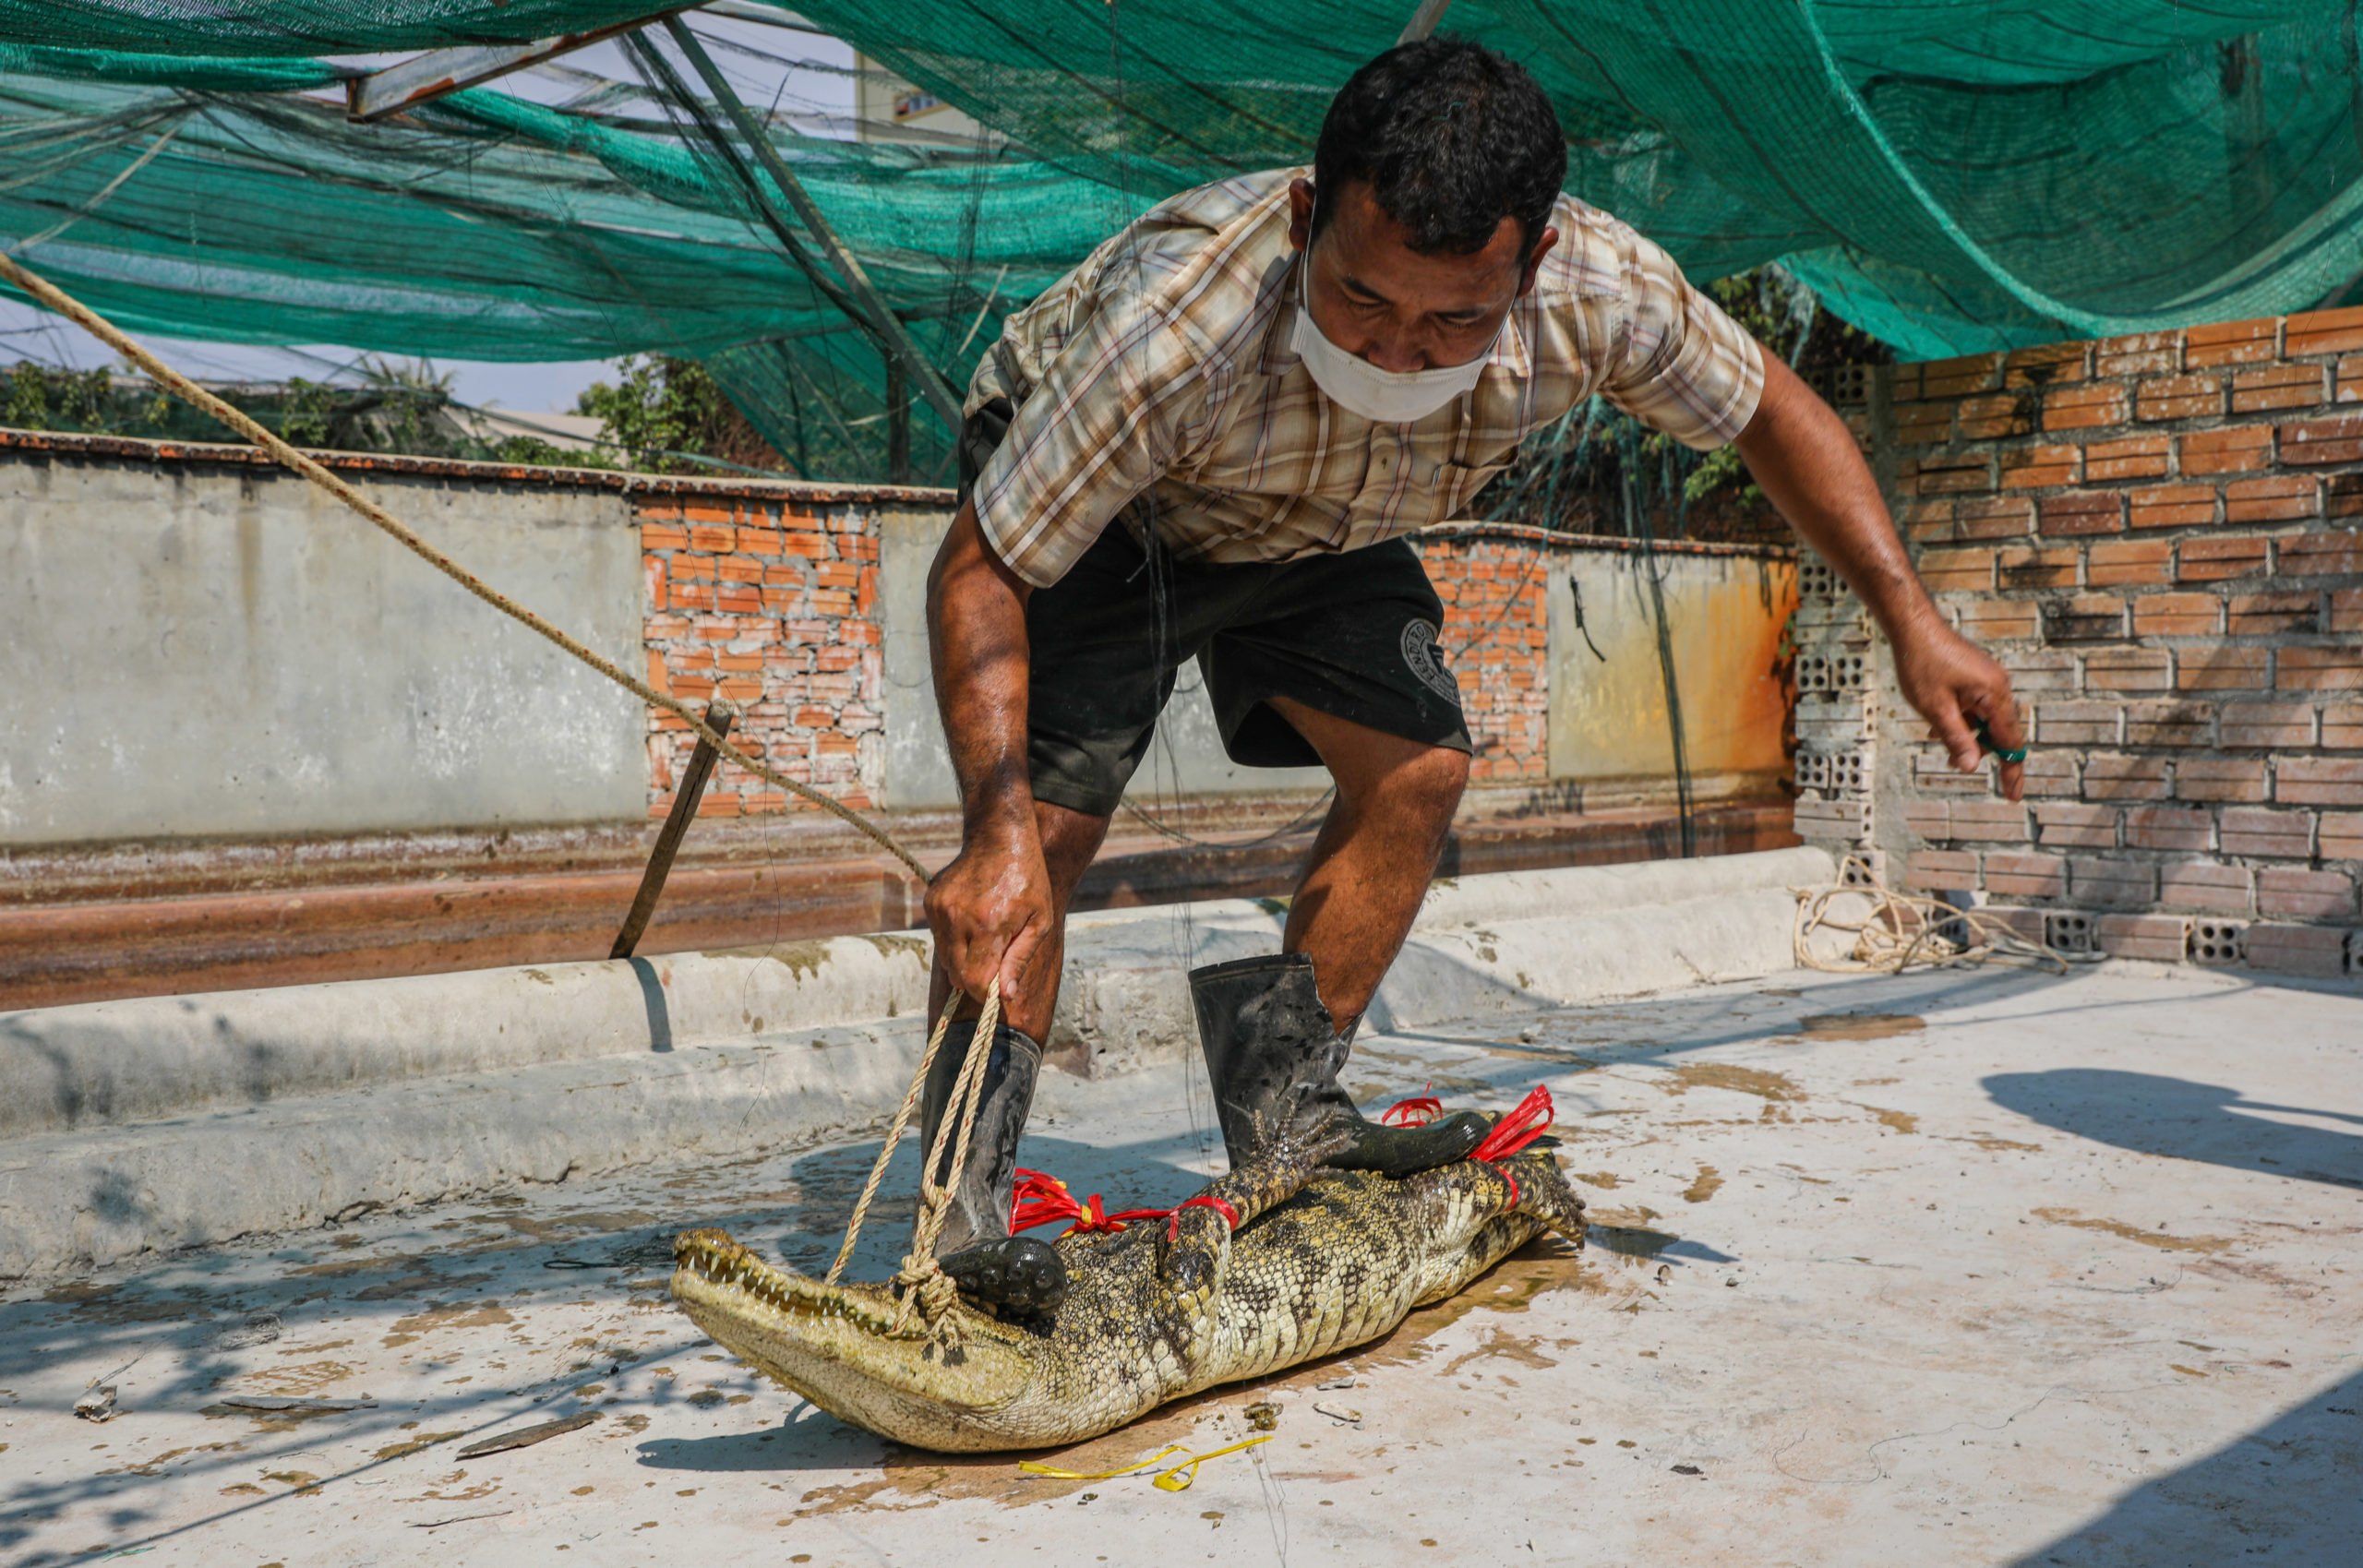 <p>Crocodile wrangler Vah Regni steps onto a Siamese crocodile as he captures it. The animal is one of 24 that was collected from a farm in Siem Reap and donated to a conservation organisation trying to save wild populations of Siamese crocodiles in Cambodia. (Image: Anton L. Delgado)</p>